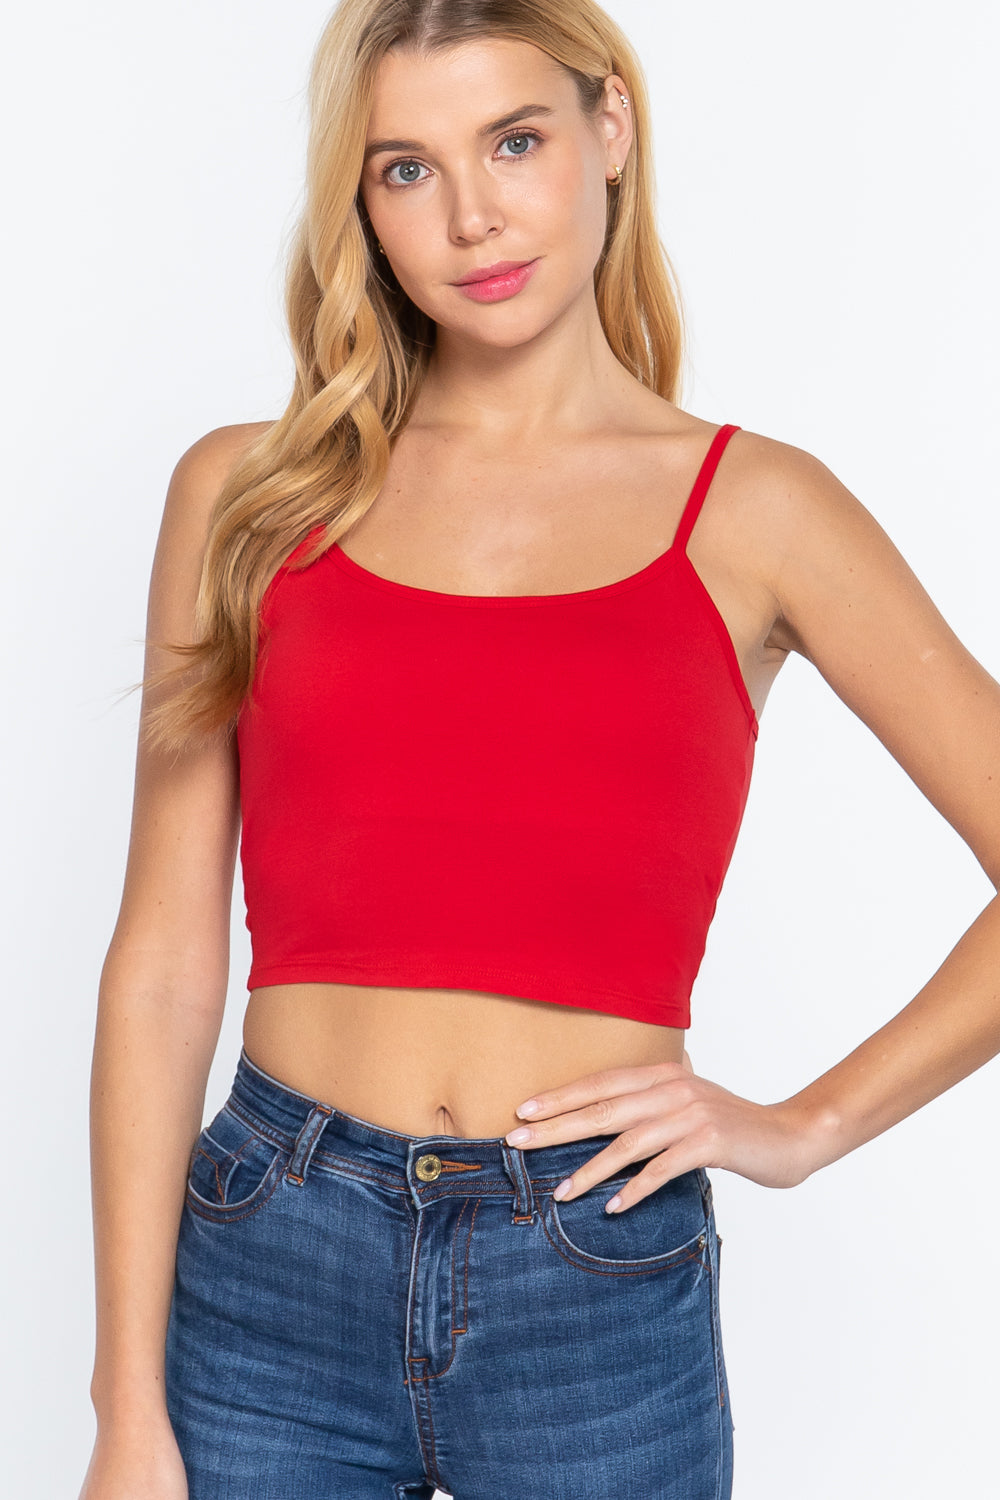 BOLD RED - Round Neck W/removable Bra Cup Cotton Spandex Bra Top - 17 colors - Ships from The USA - womens tank top at TFC&H Co.